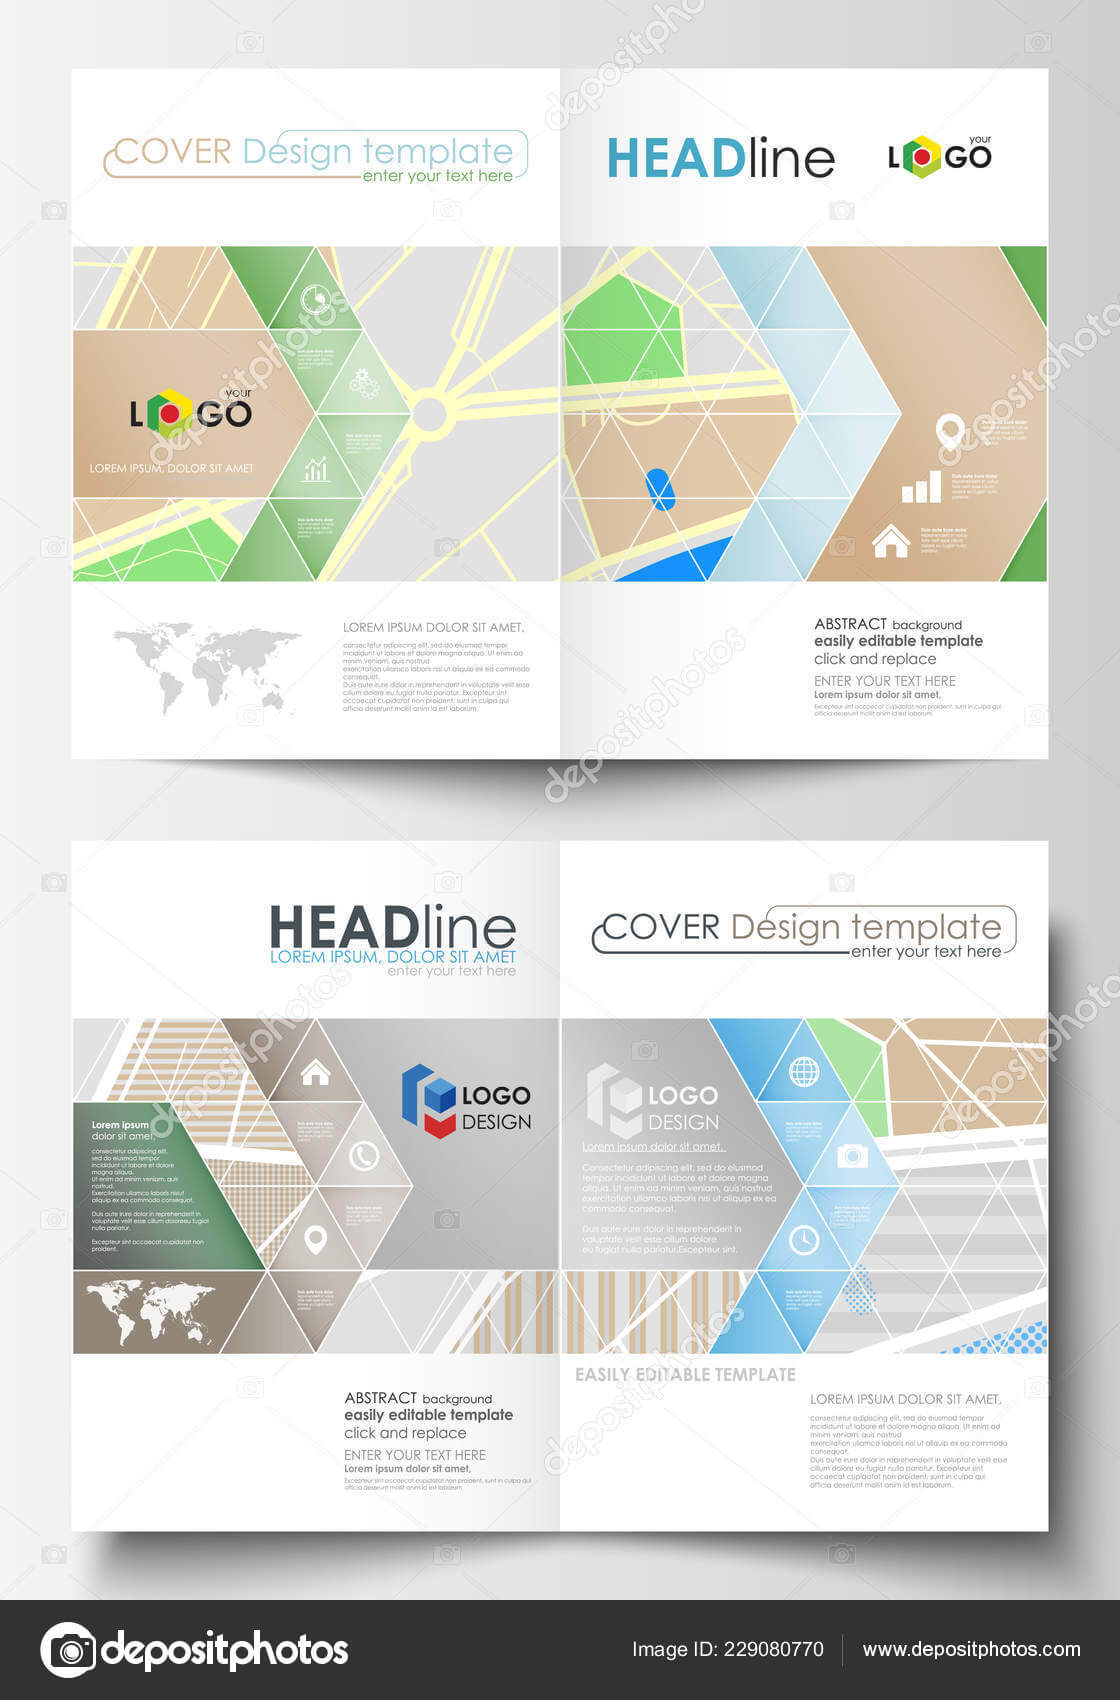 Business Templates For Bi Fold Brochure, Magazine, Flyer Or With Blank City Map Template